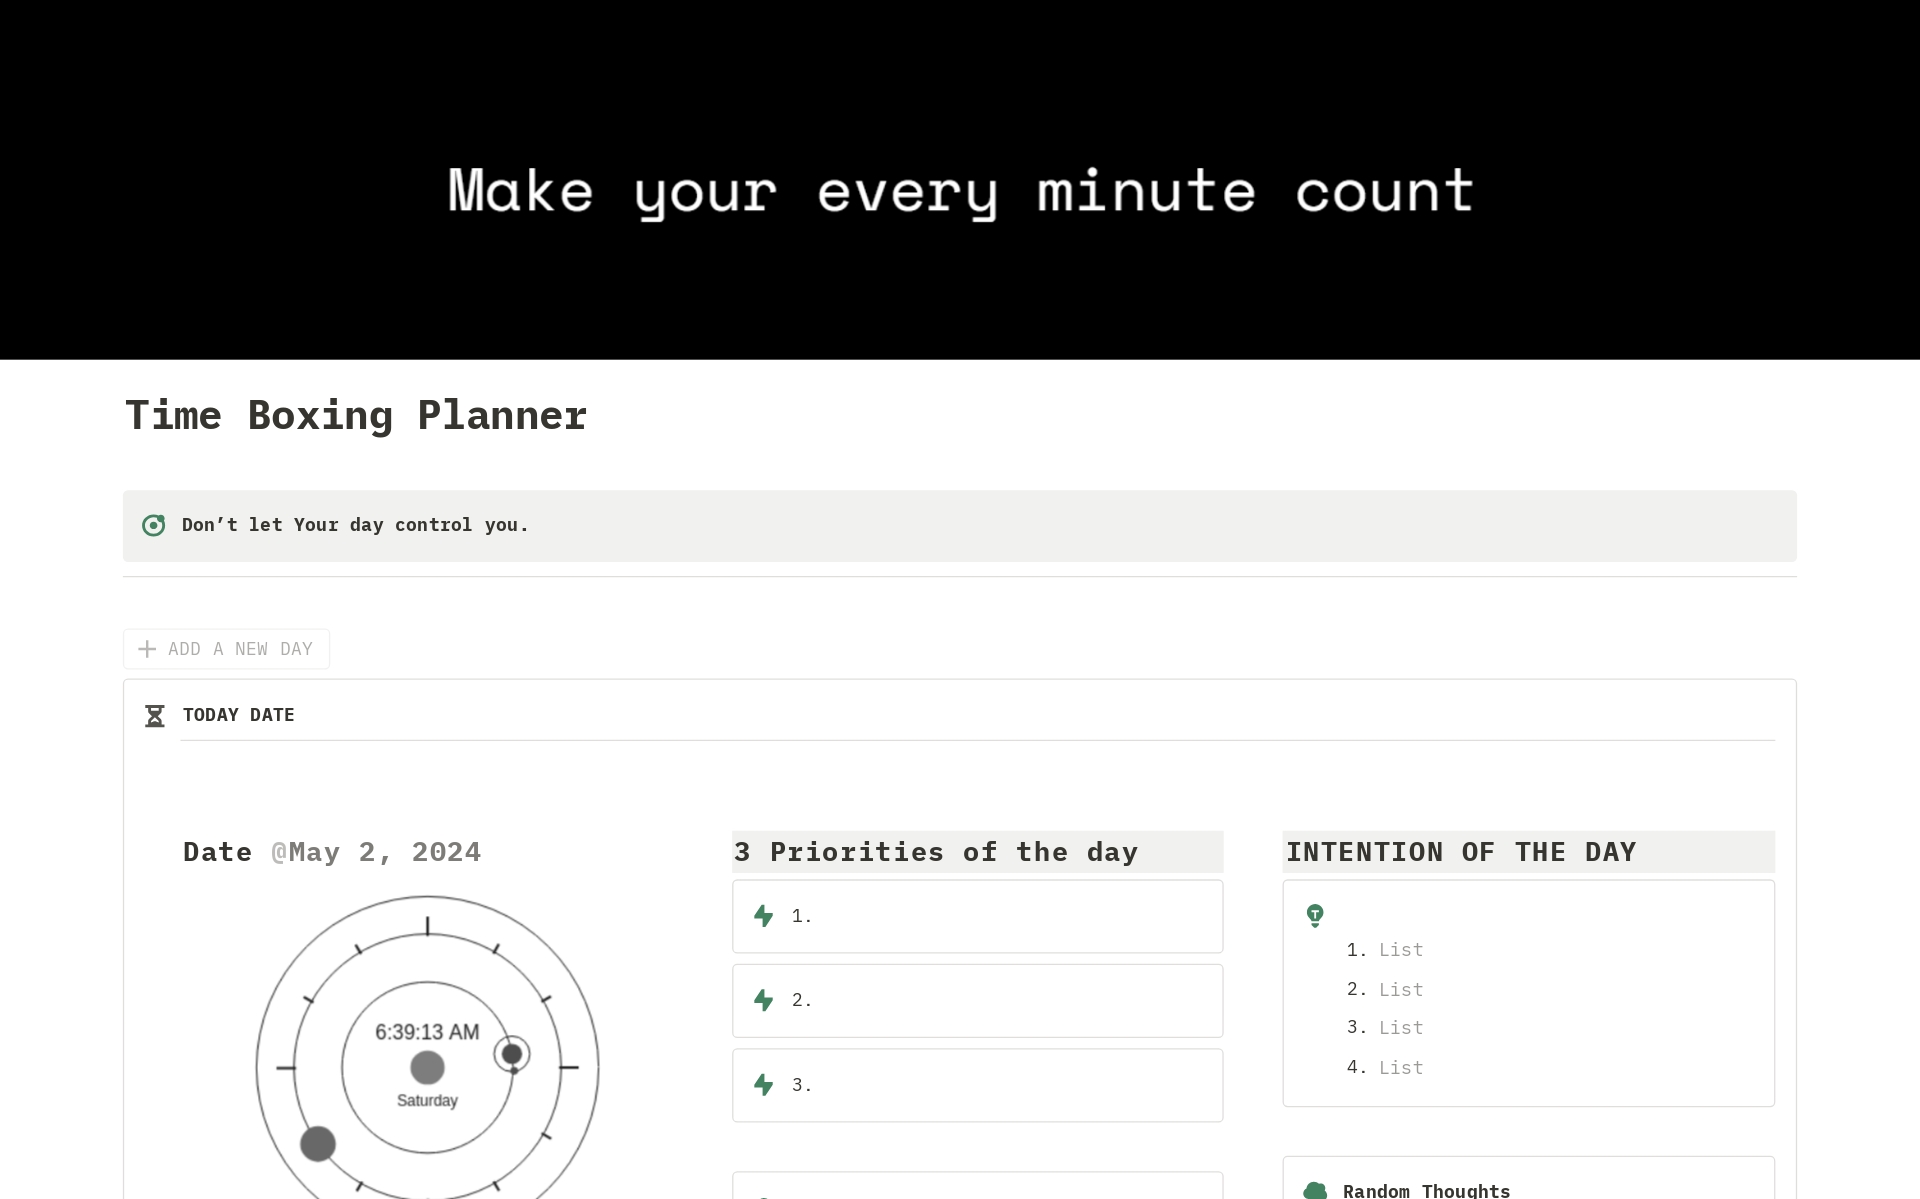 Time Boxing Planner is a template to track every hour of the day and use it wisely. 